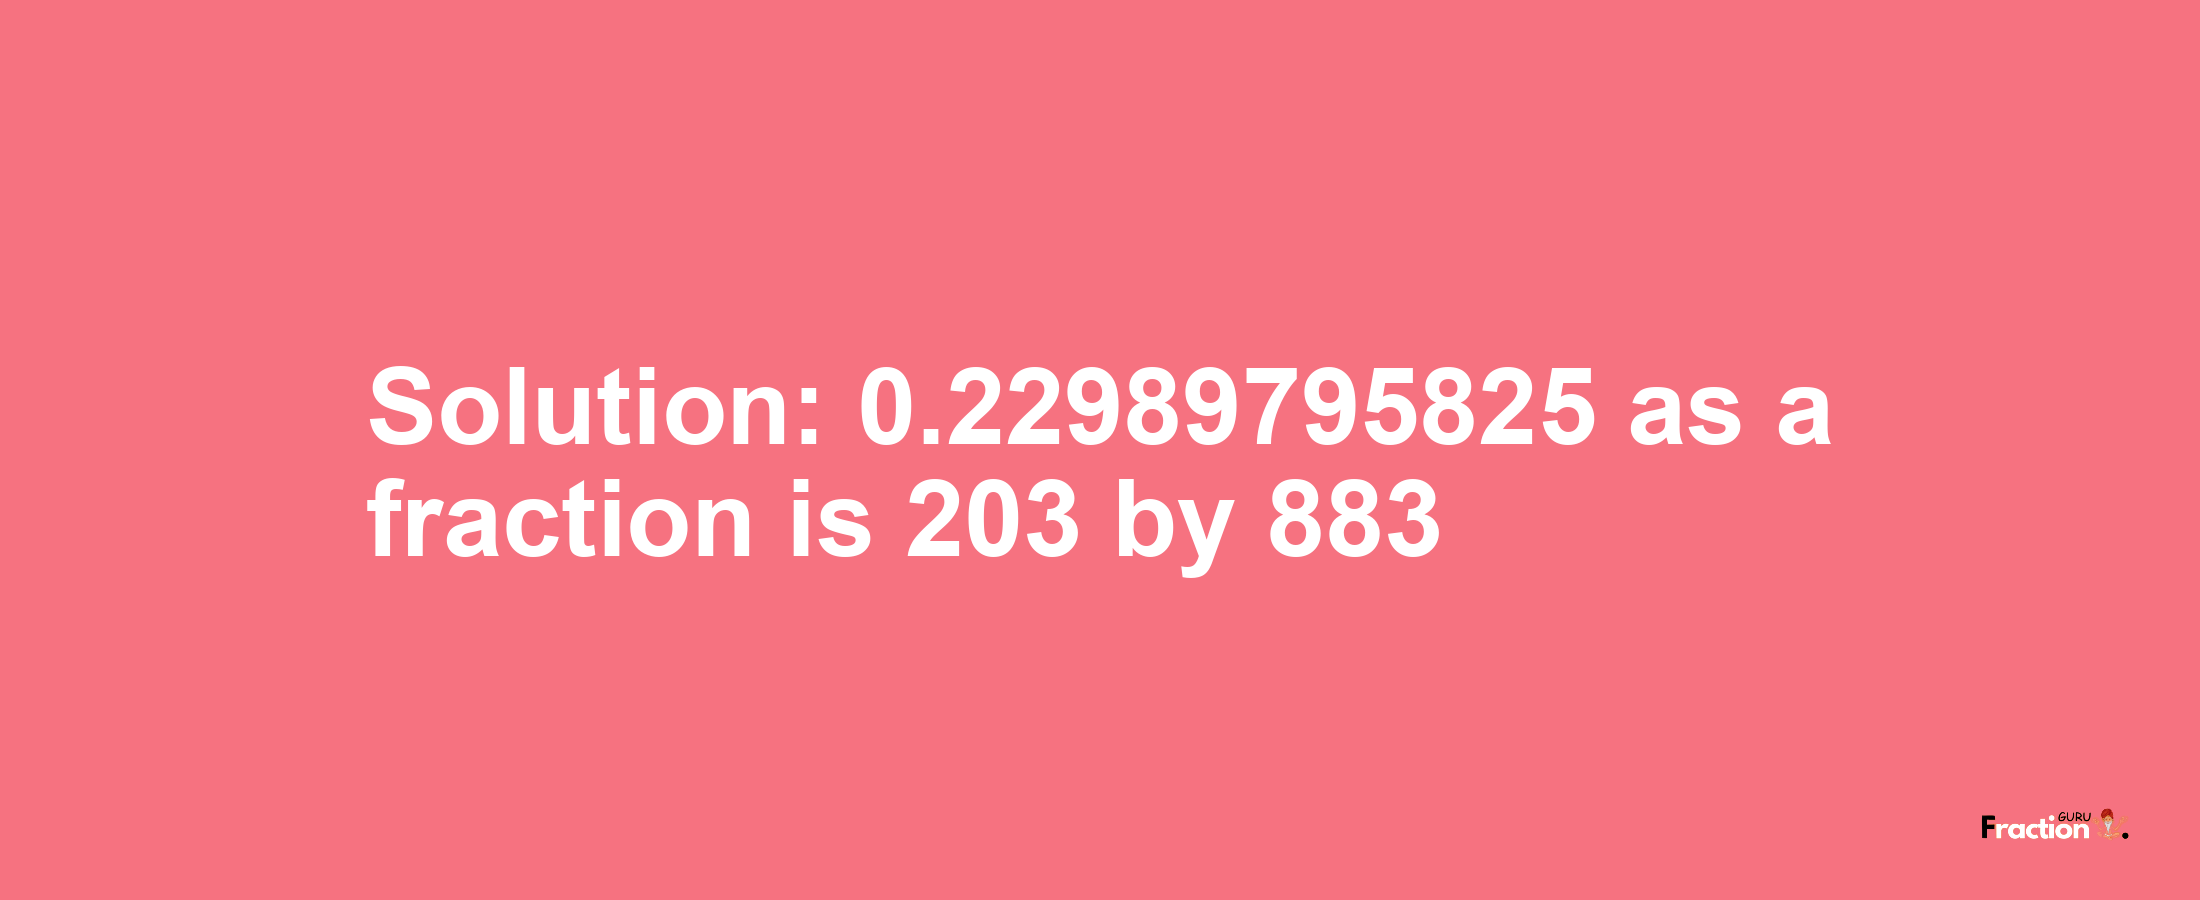 Solution:0.22989795825 as a fraction is 203/883